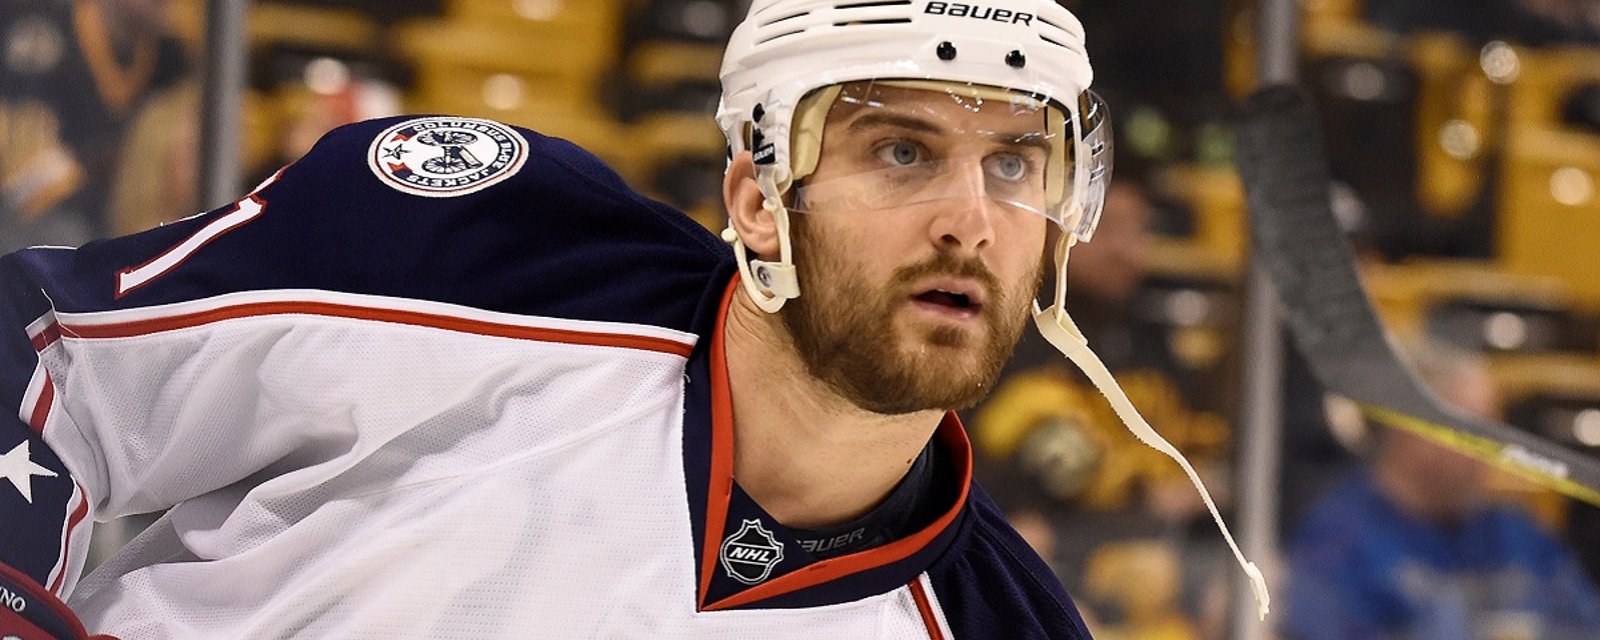 NHL forward makes massive donation to the hospital that saved his little girl.